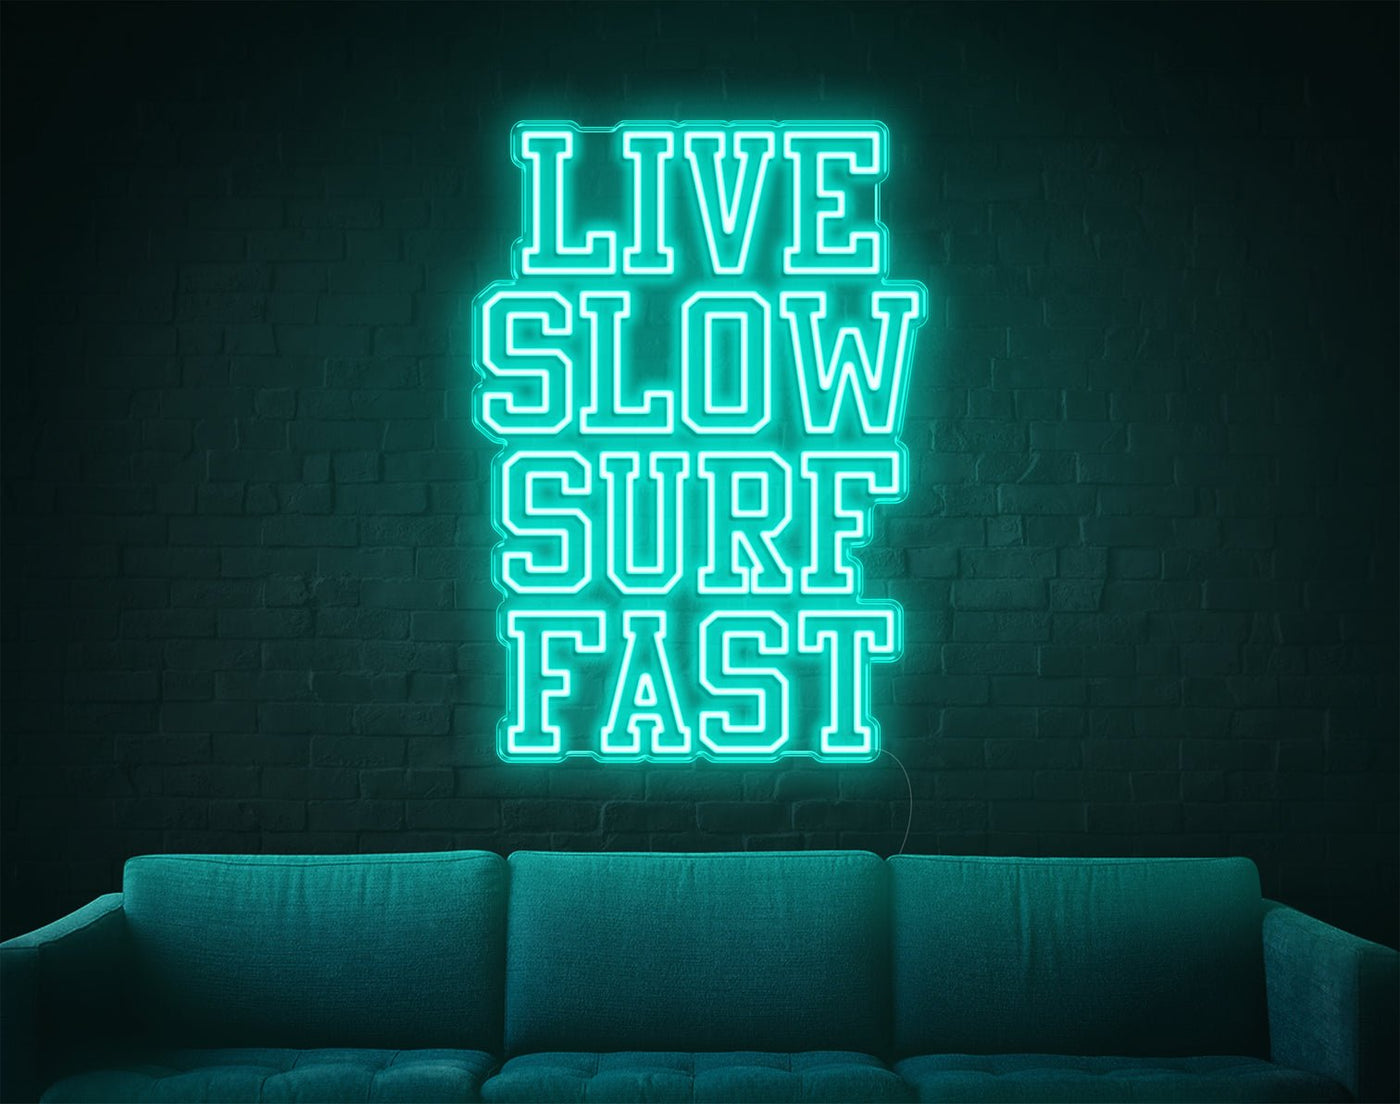 Live Slow Surf Fast LED Neon Sign - 27inch x 19inchTurquoise